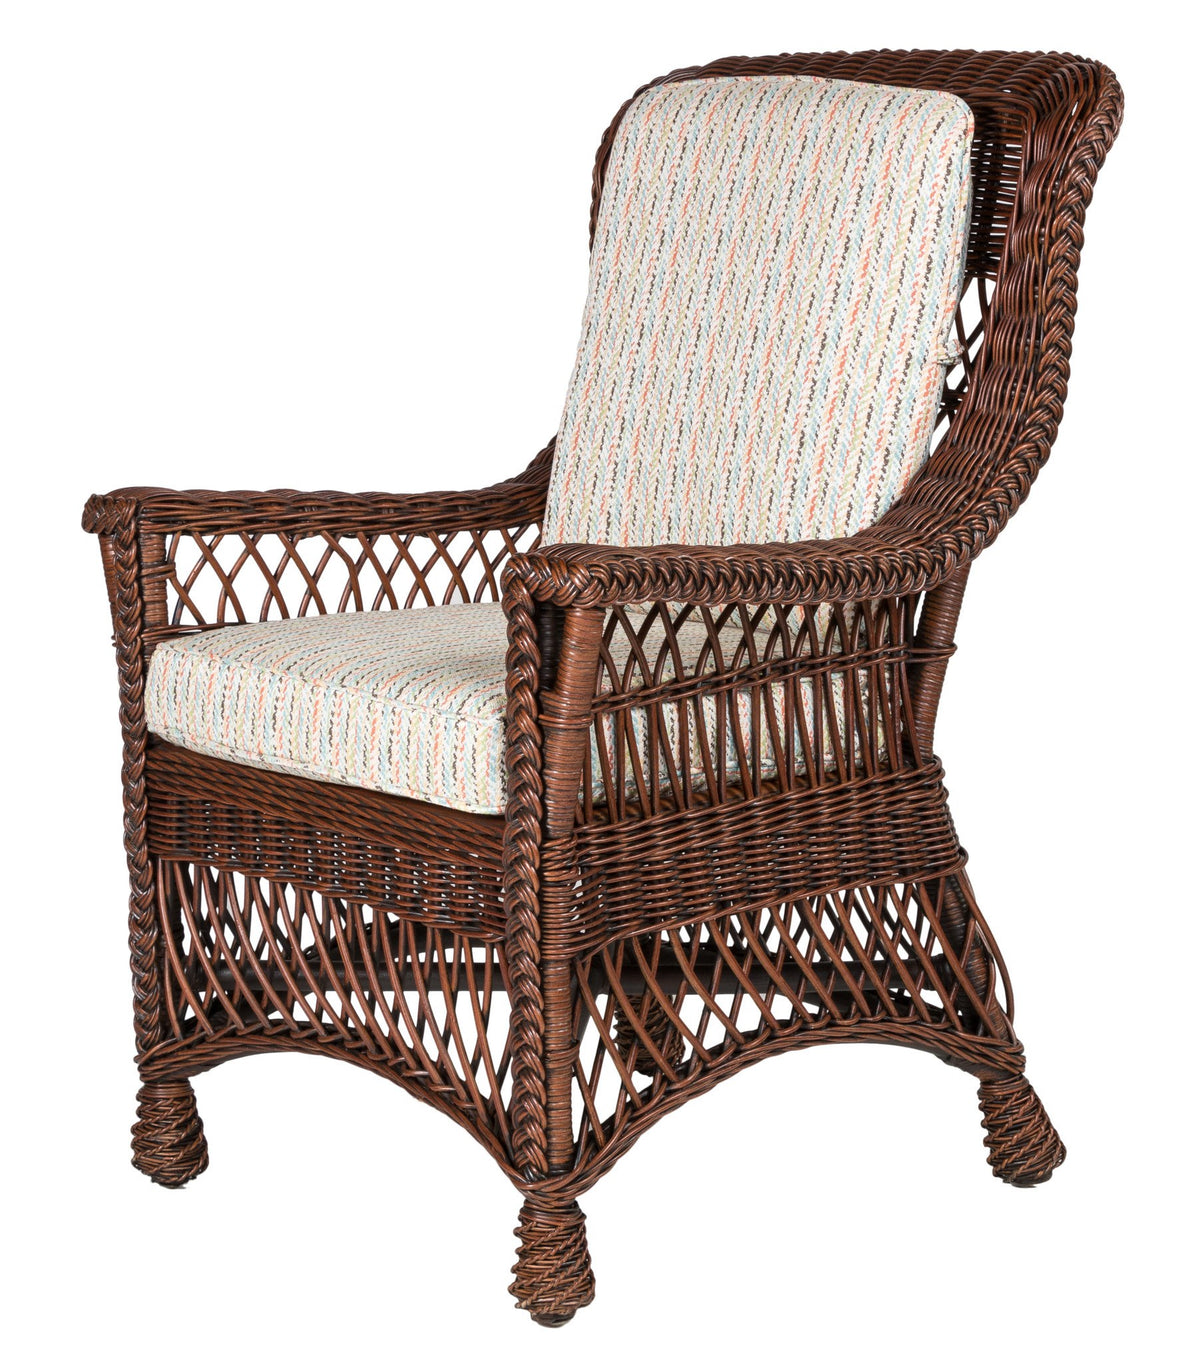 Designer Wicker &amp; Rattan By Tribor Rockport Dining Arm Chair Dining Chair - Rattan Imports